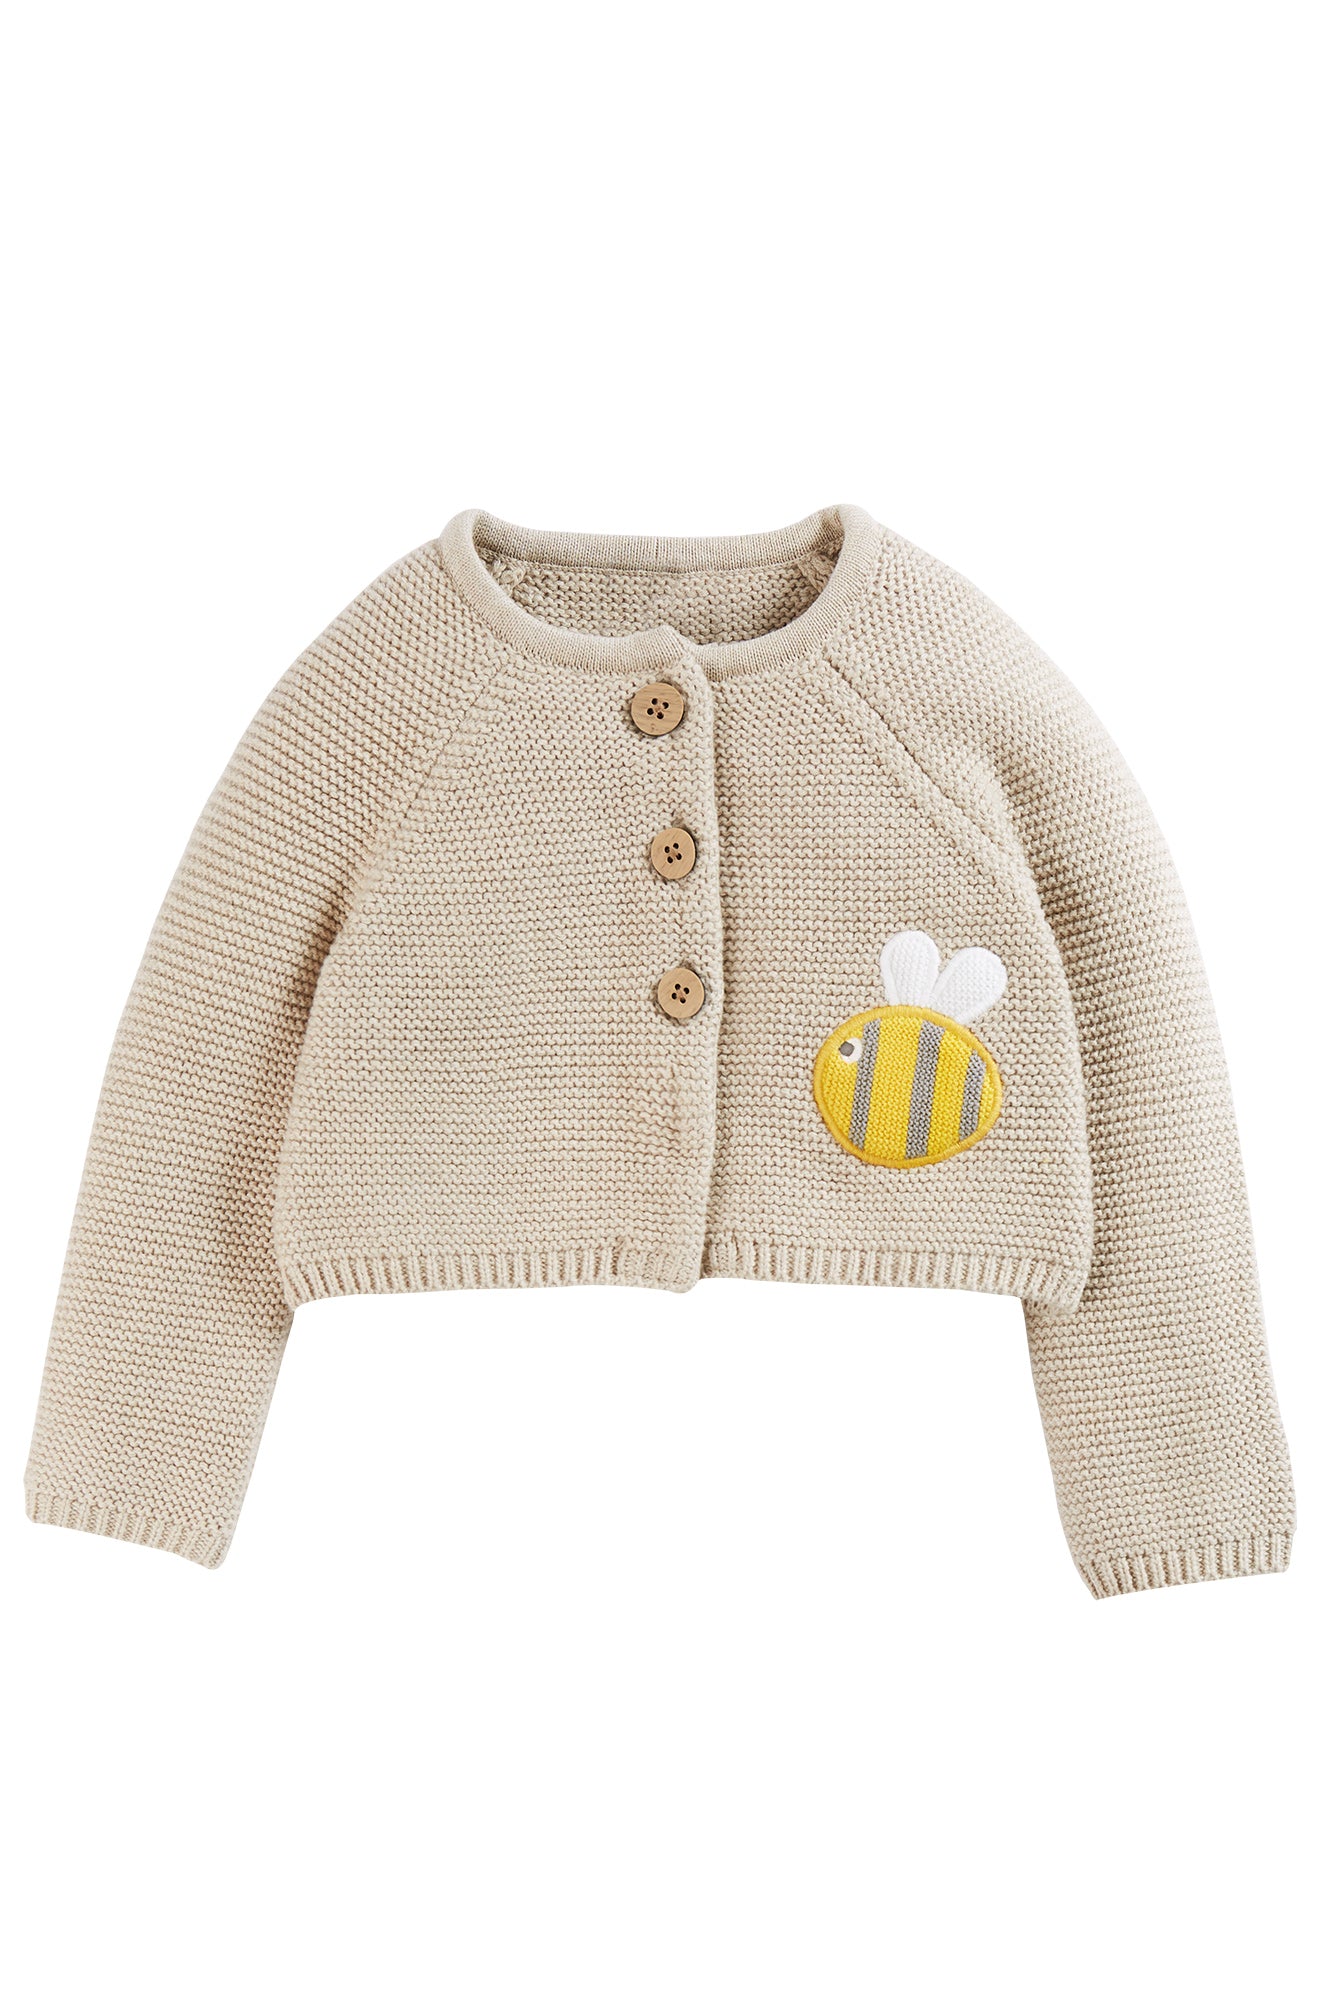 frugi baby cardi at whippersnappersonline